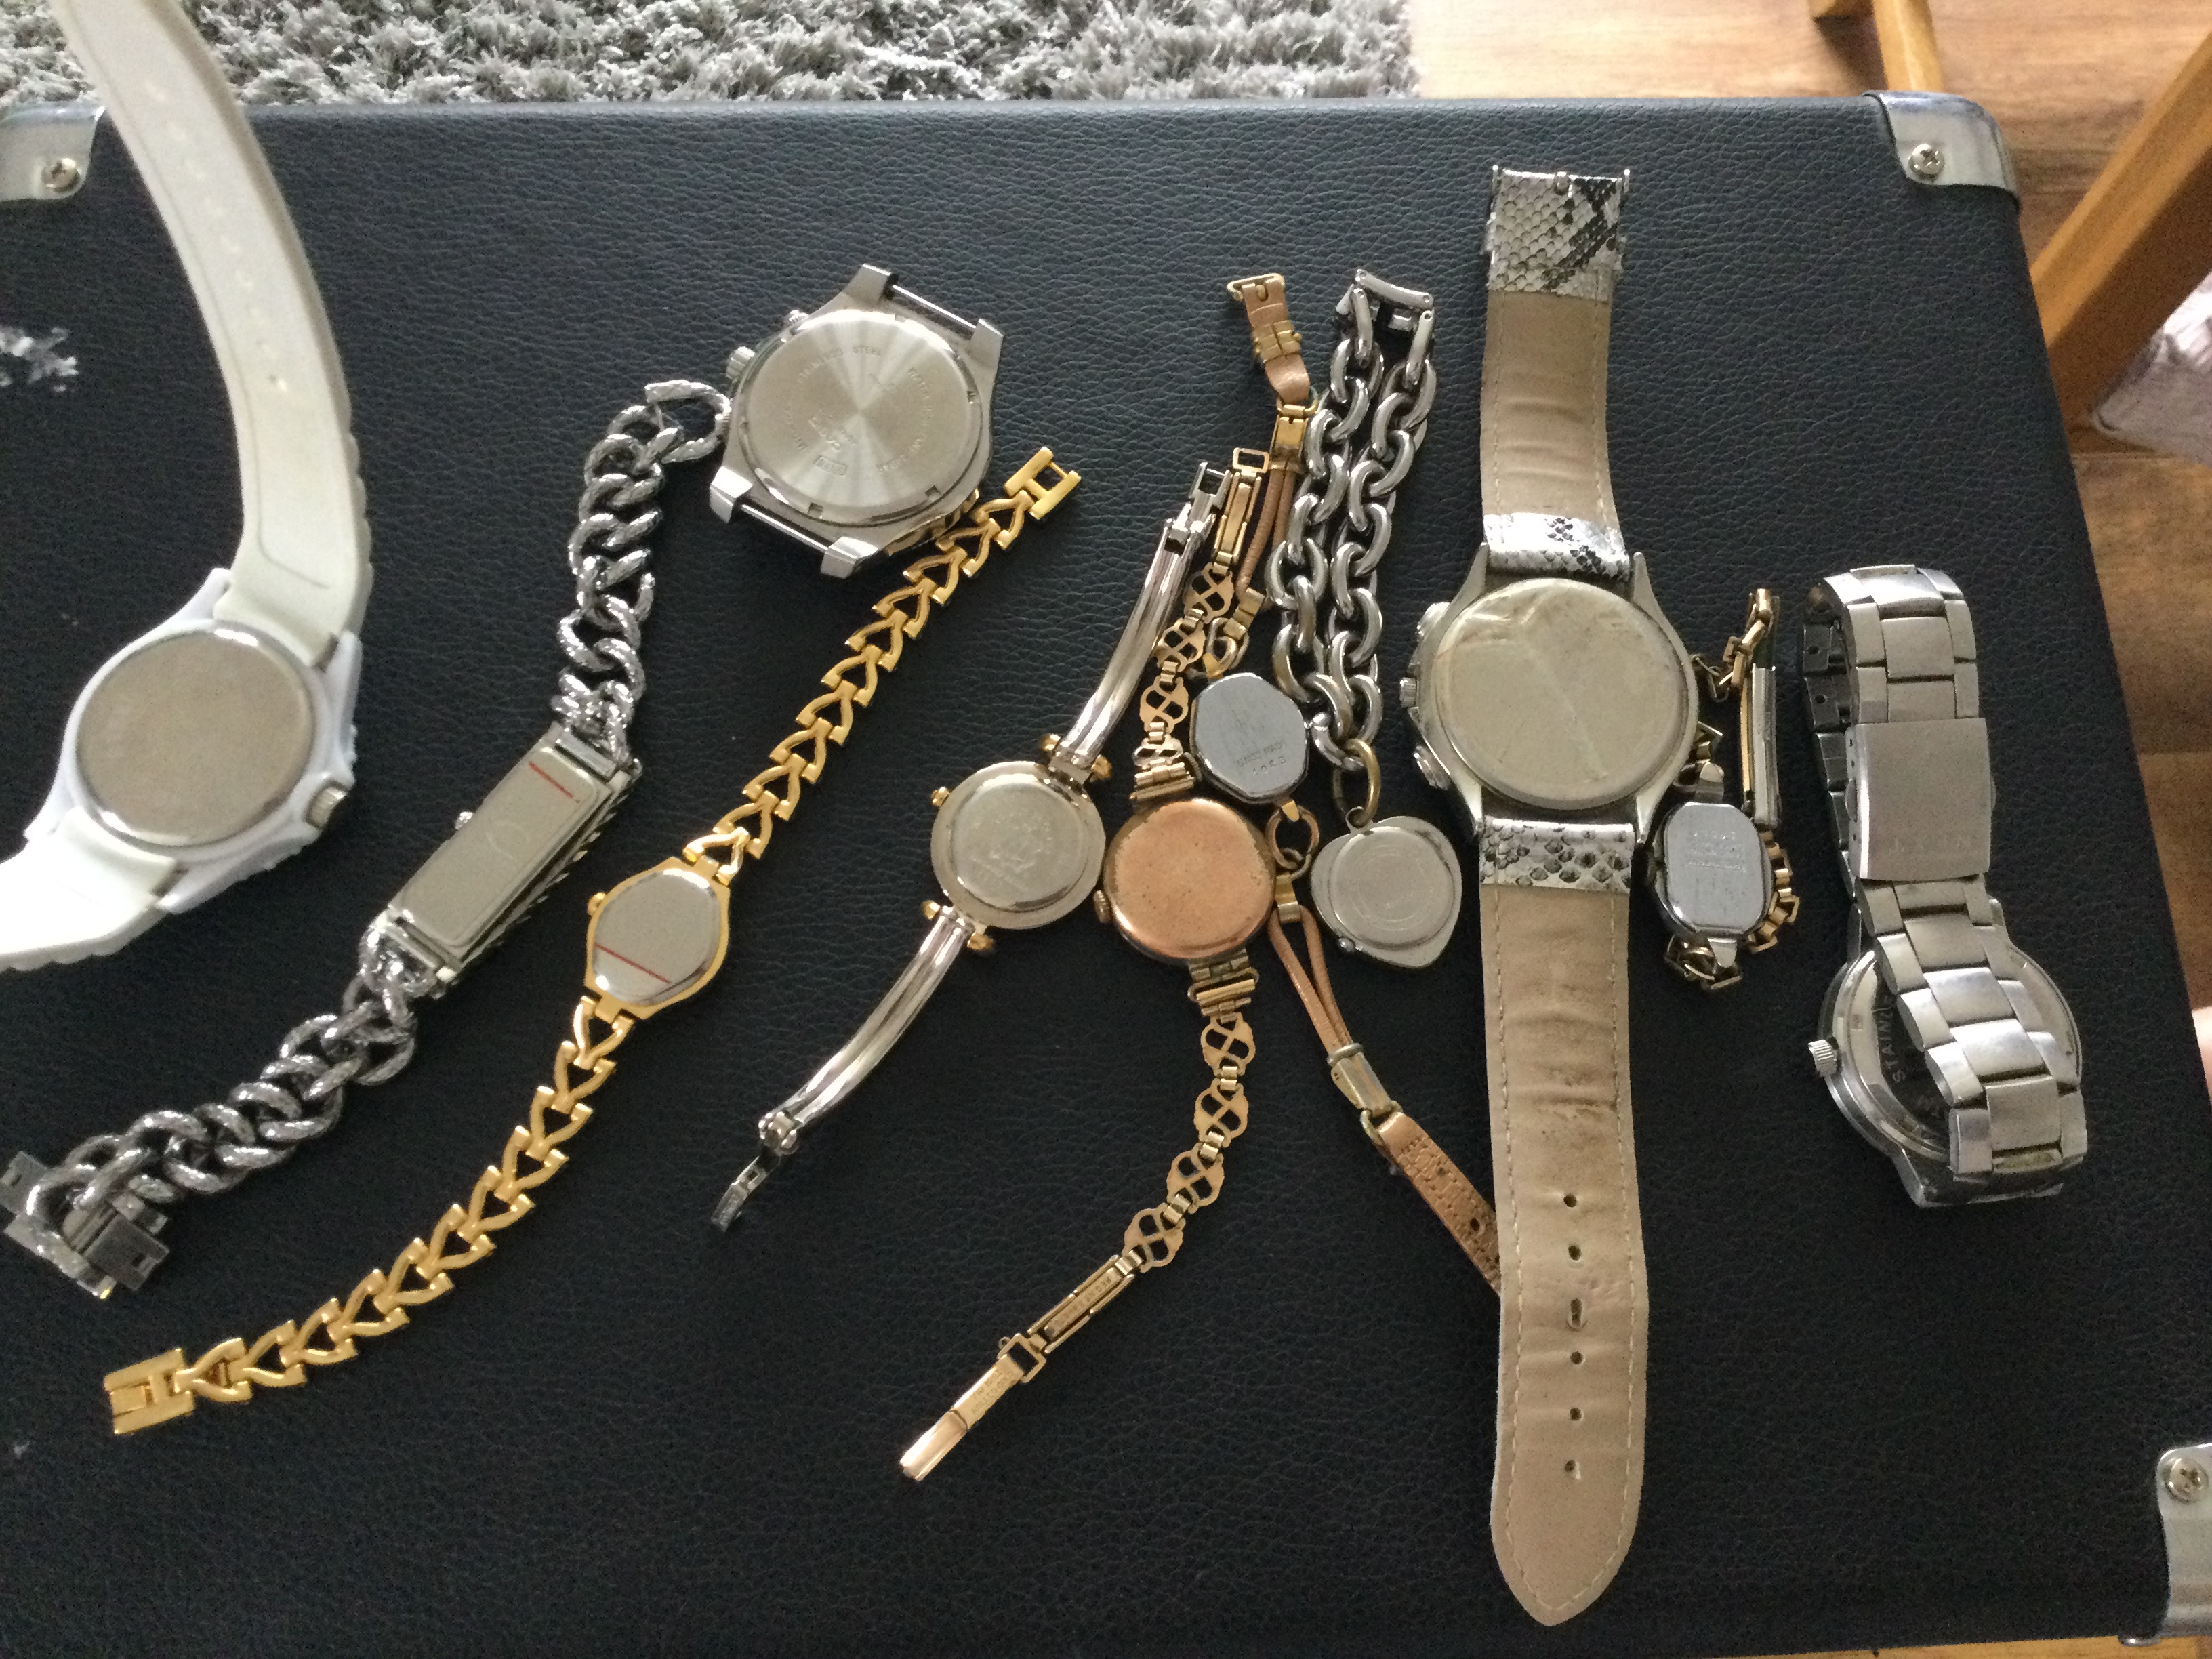 Collection of 11 Watches, Next, Cavalli, Ice, Giorgio, Nelson Etc (GS 29) - Image 5 of 7